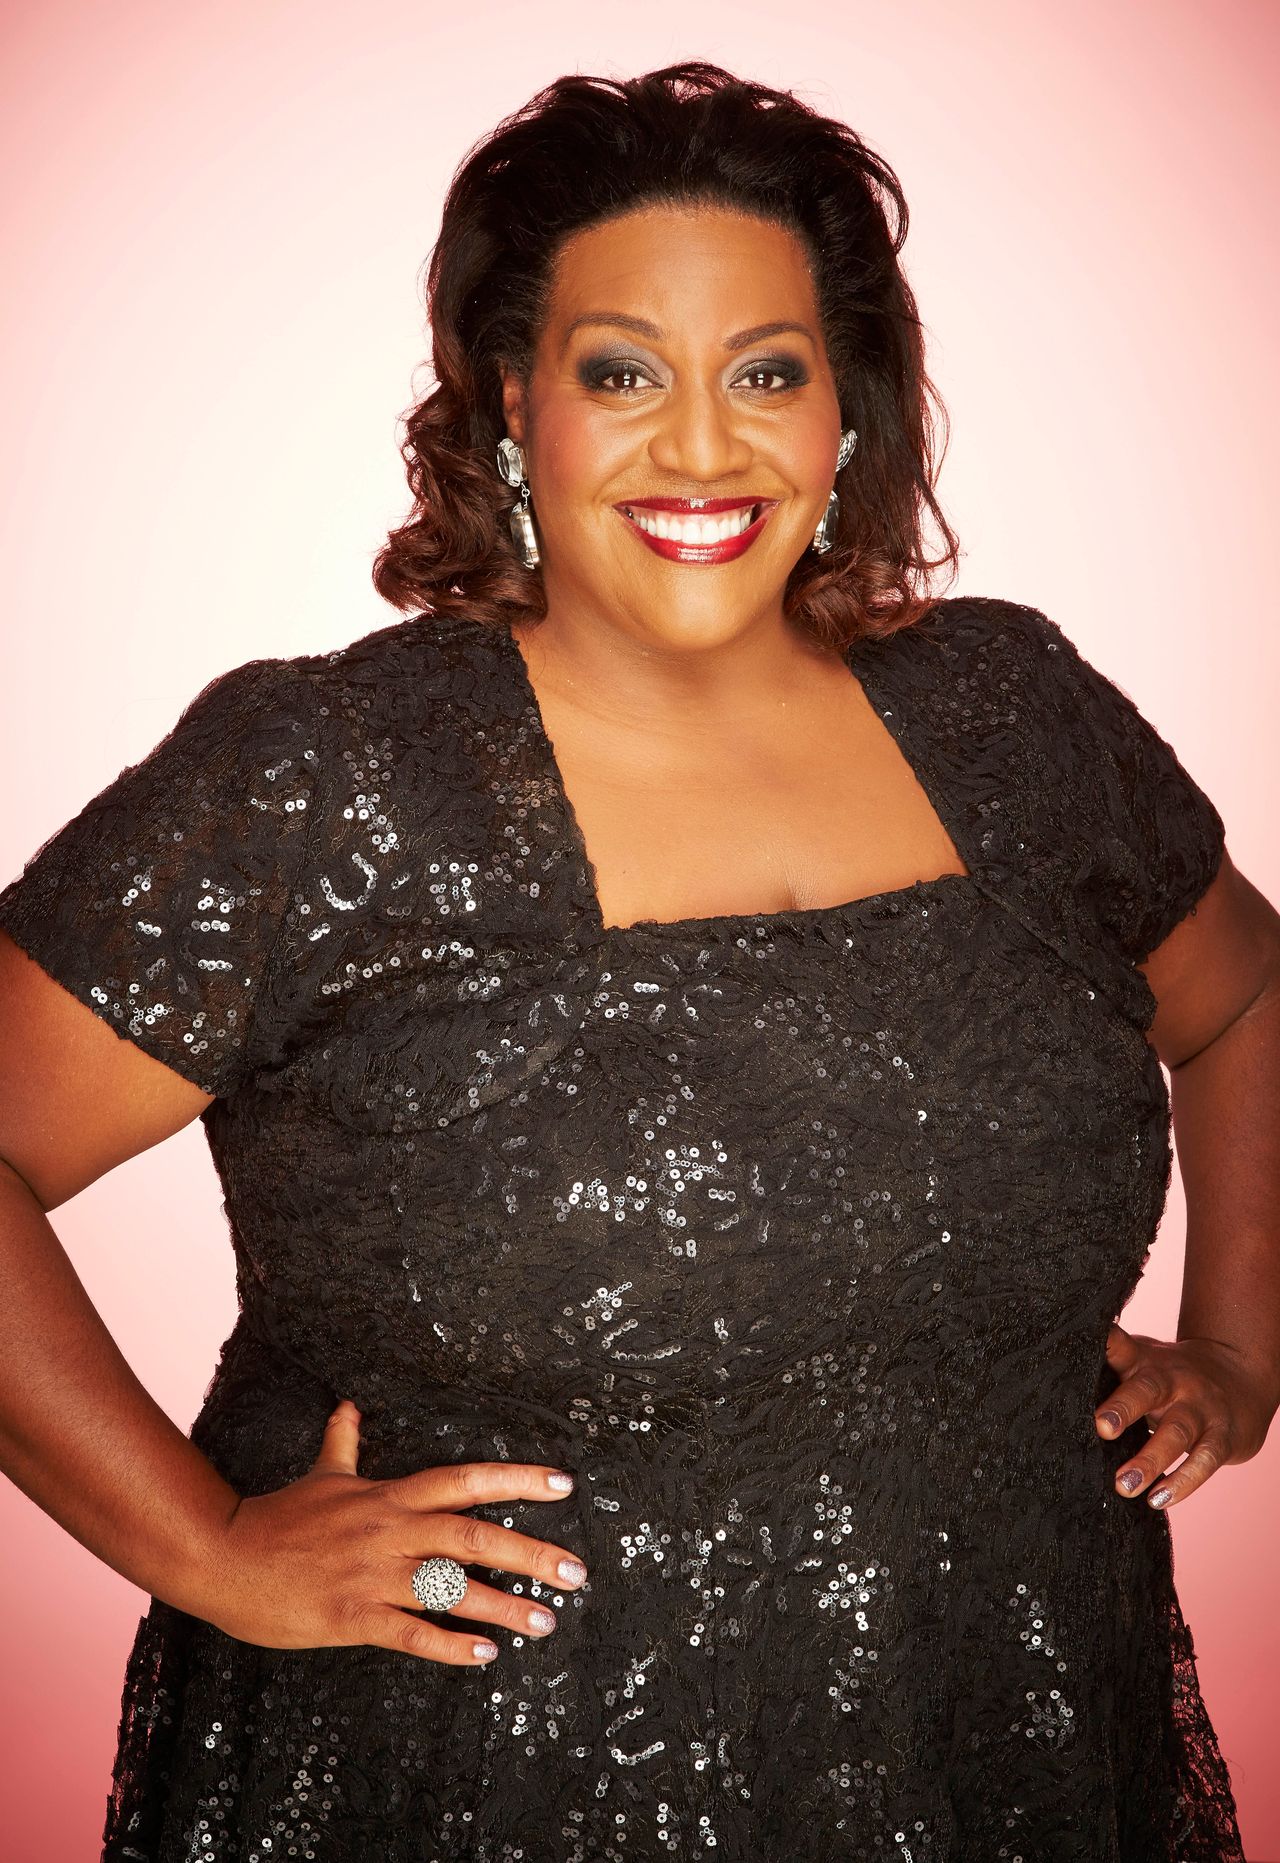 Alison Hammond has been part of the 'This Morning' family since 2002